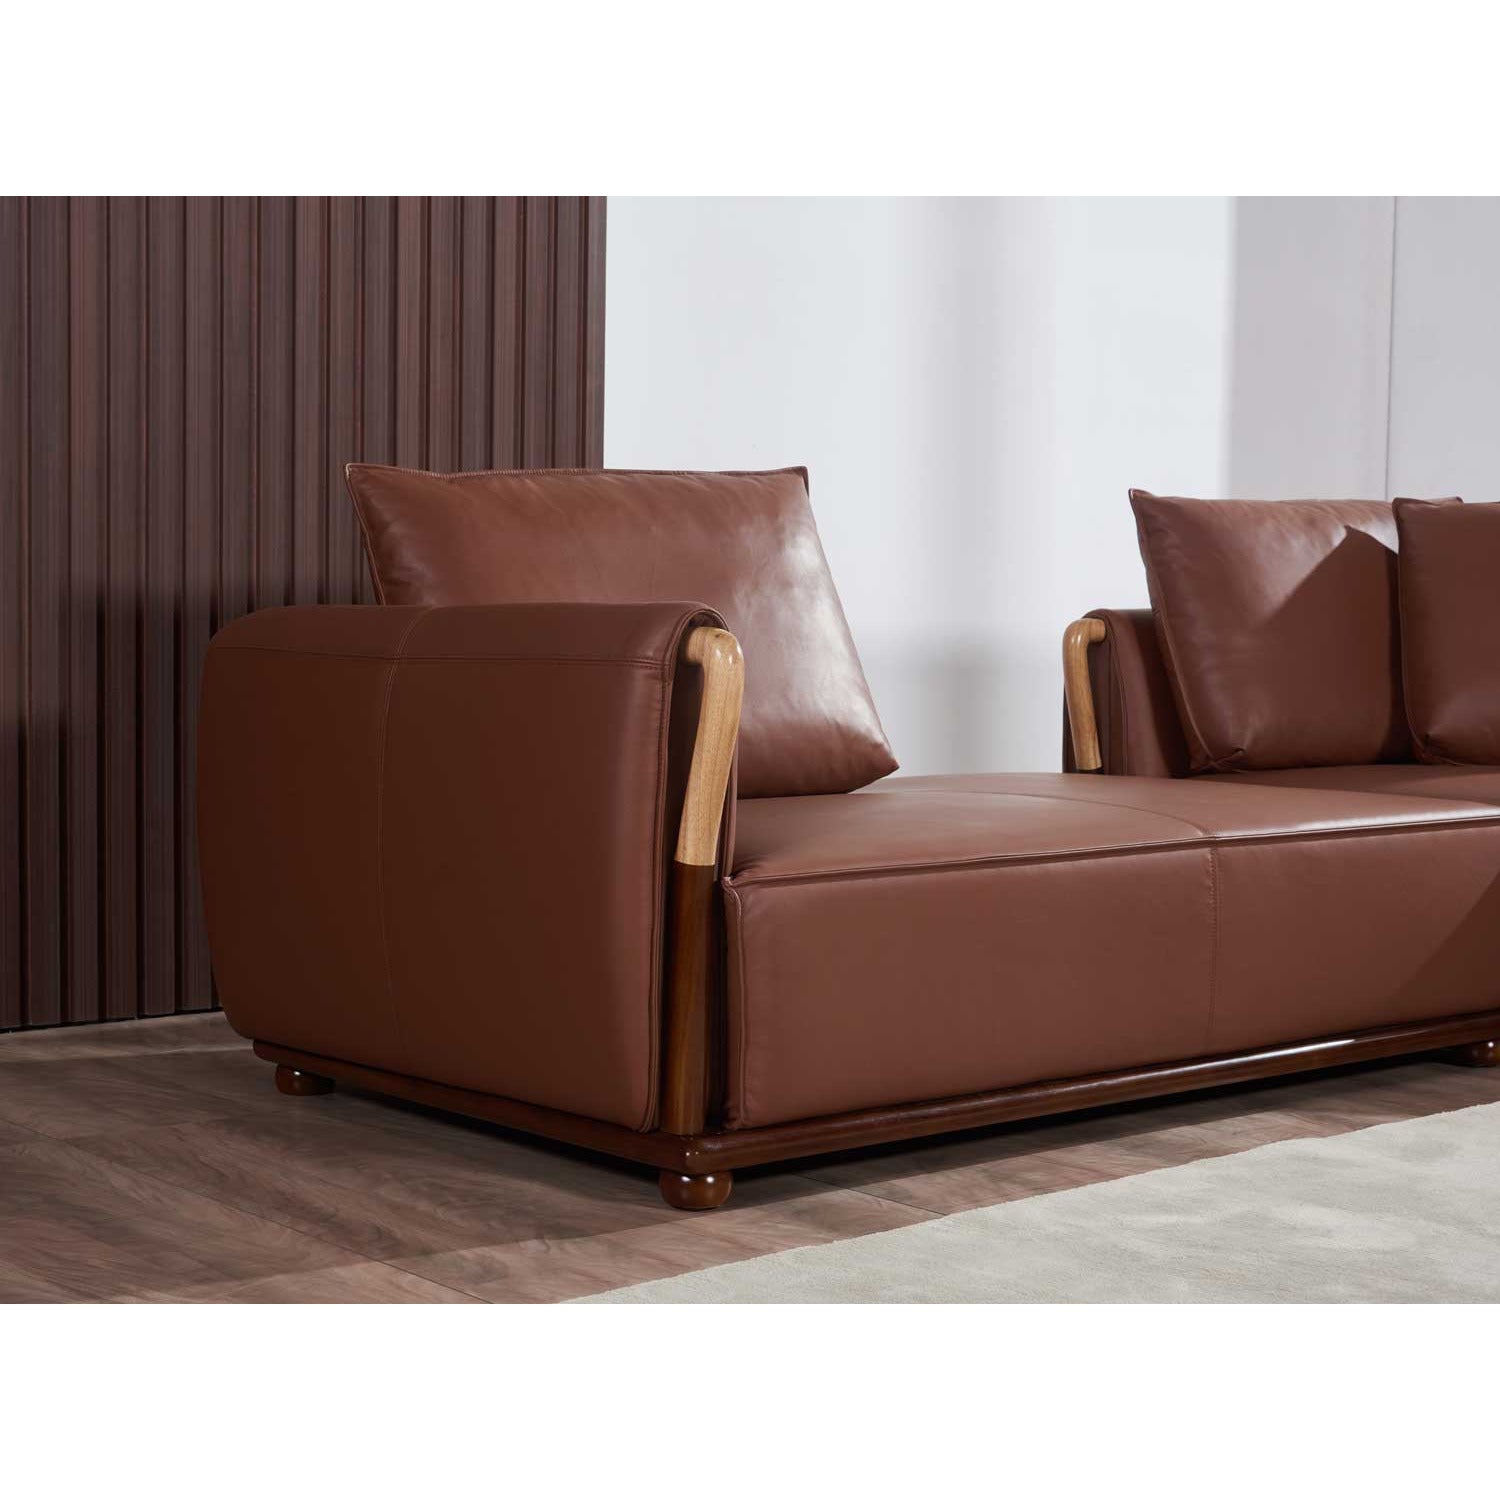 European Furniture - Skyline Sectional in Russet Brown - 26662 - New Star Living